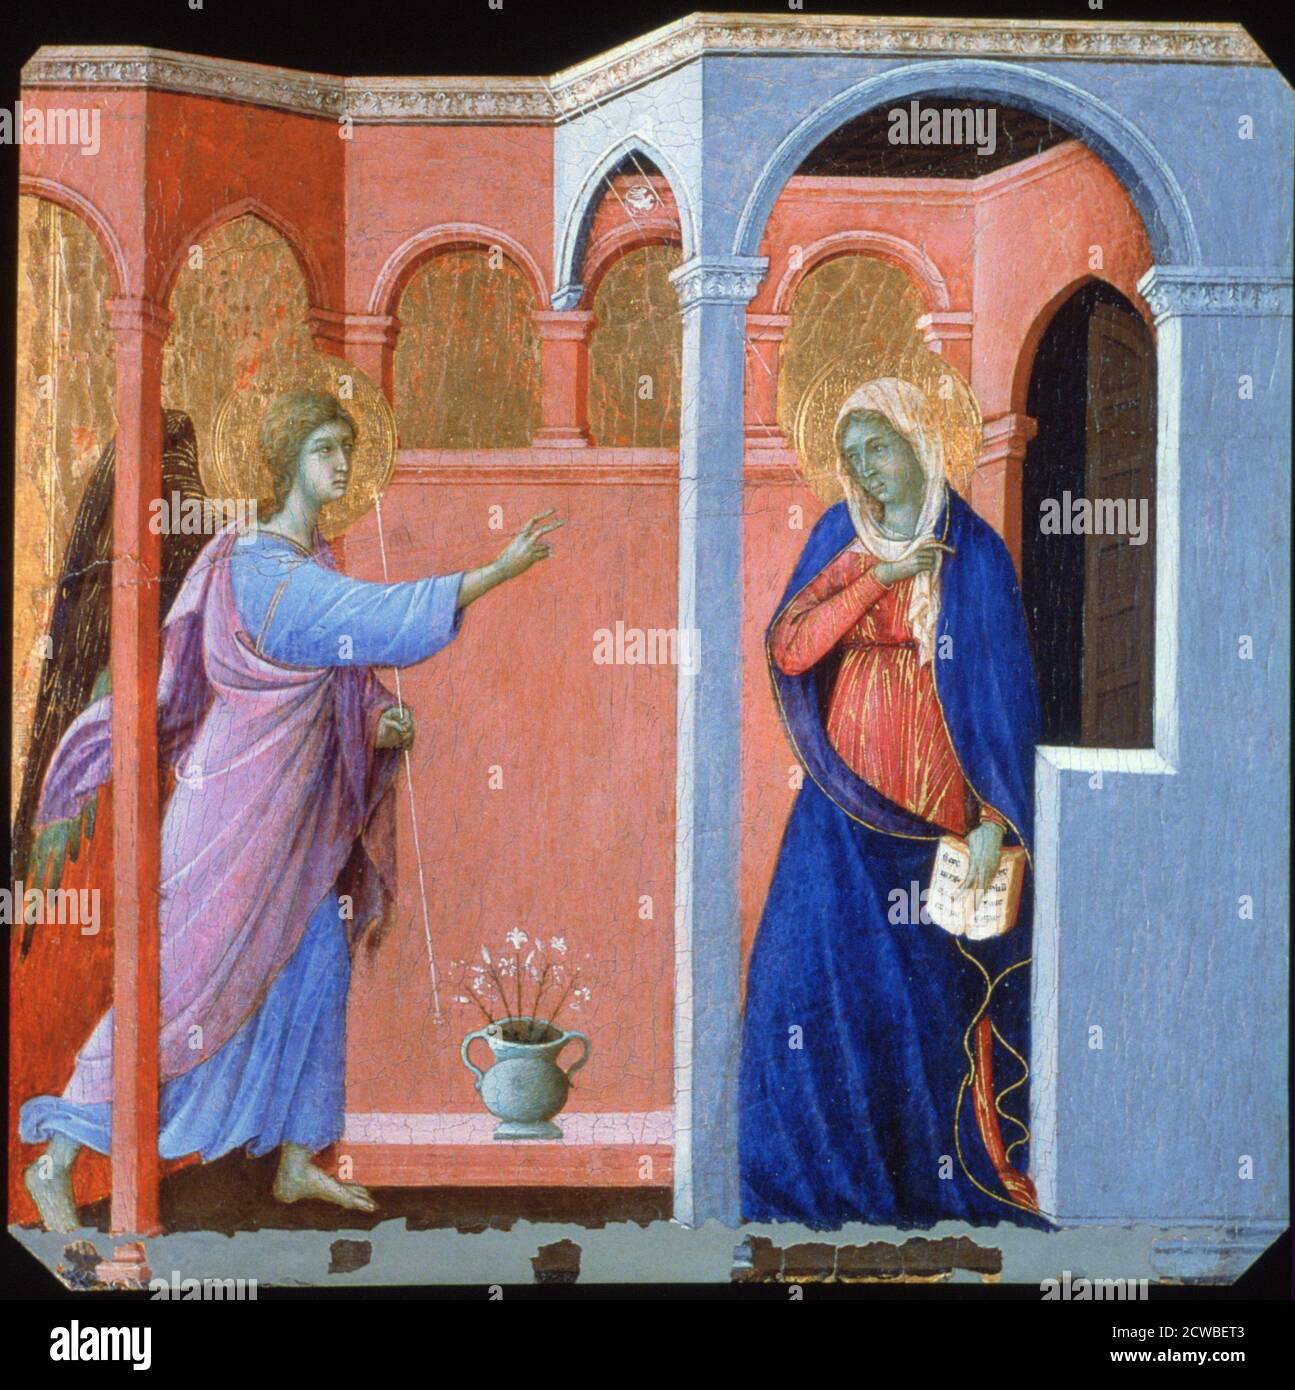 Panel from the Maesta Altarpiece: The Annunciation', 1311. Artist: Duccio di Buoninsegna. Duccio di Buoninsegna (c1255-1320) was an Italian painter active in Siena, in the late 13th and early 14th century. He was hired throughout his life to complete many important works in government and religious buildings around Italy. Stock Photo